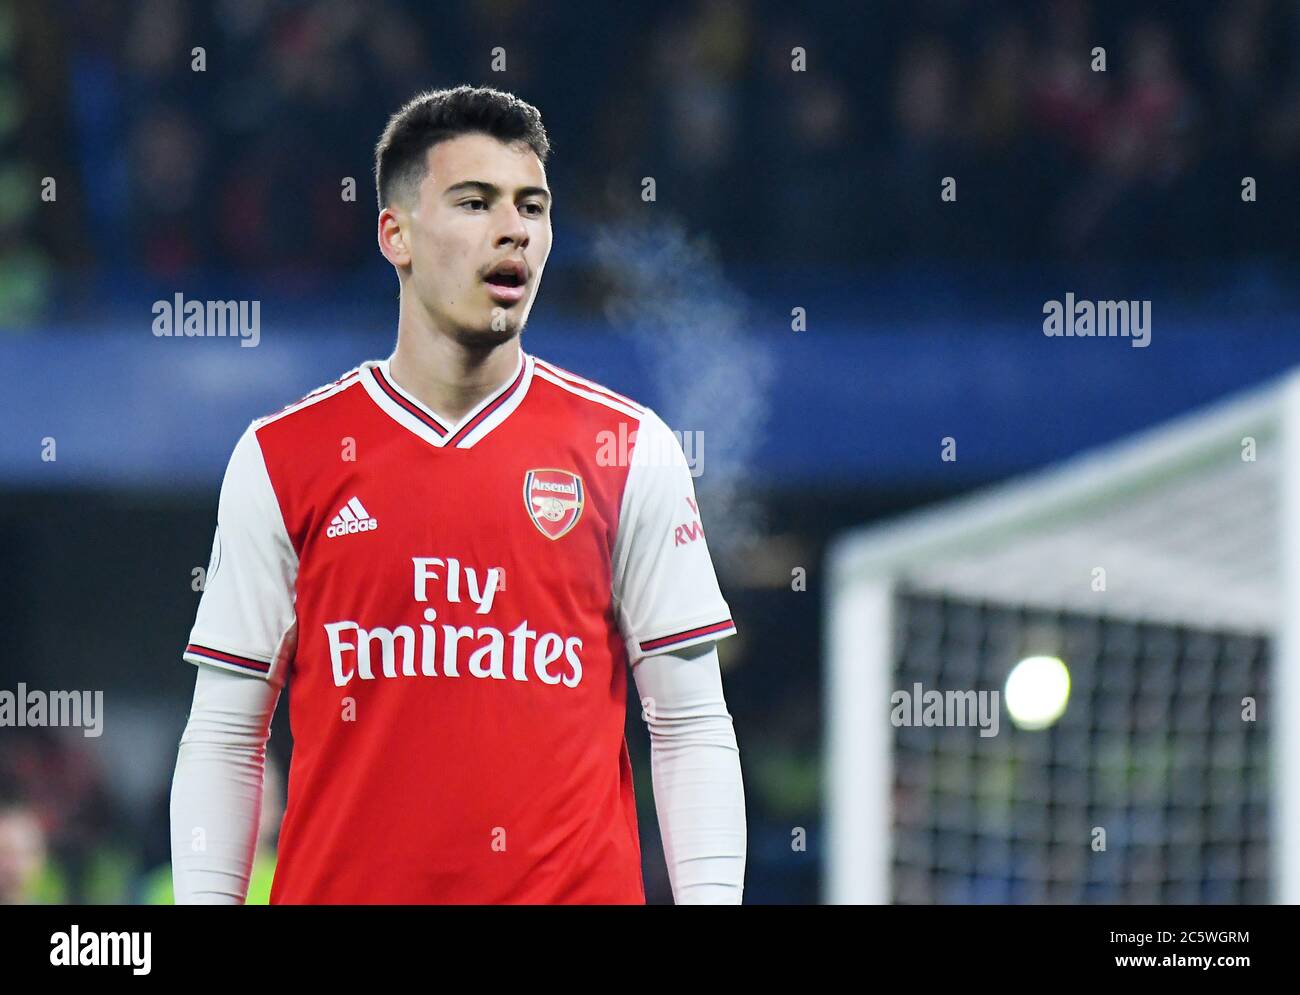 LONDON, ENGLAND - JANUARY 21, 2020: Gabriel Martinelli of Arsenal pictured during the 2019/20 Premier League game between Chelsea FC and Arsenal FC at Stamford Bridge. Stock Photo